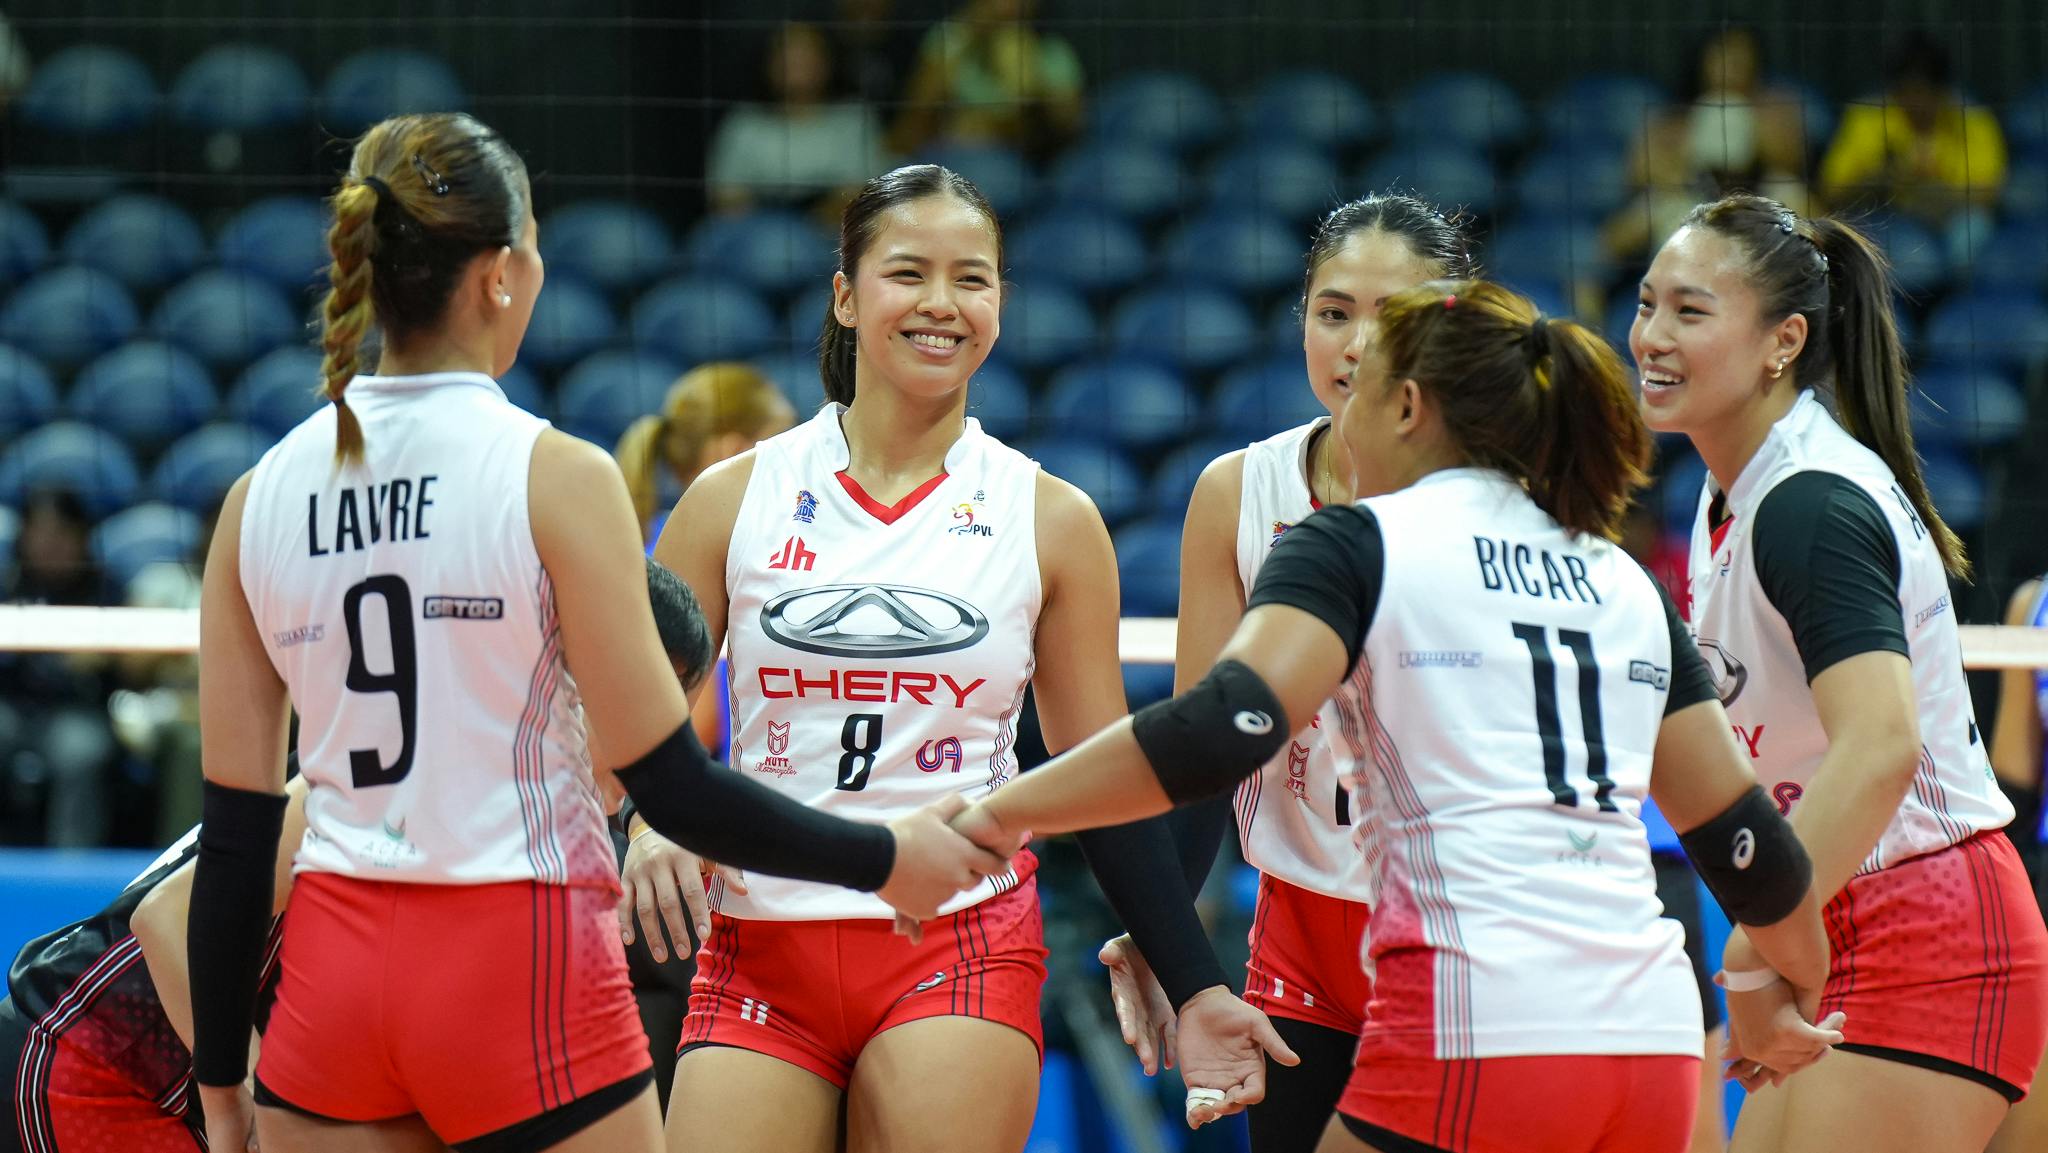 PVL: Chery Tiggo and Mylene Paat on top, all the stats in All-Filipino Week 1